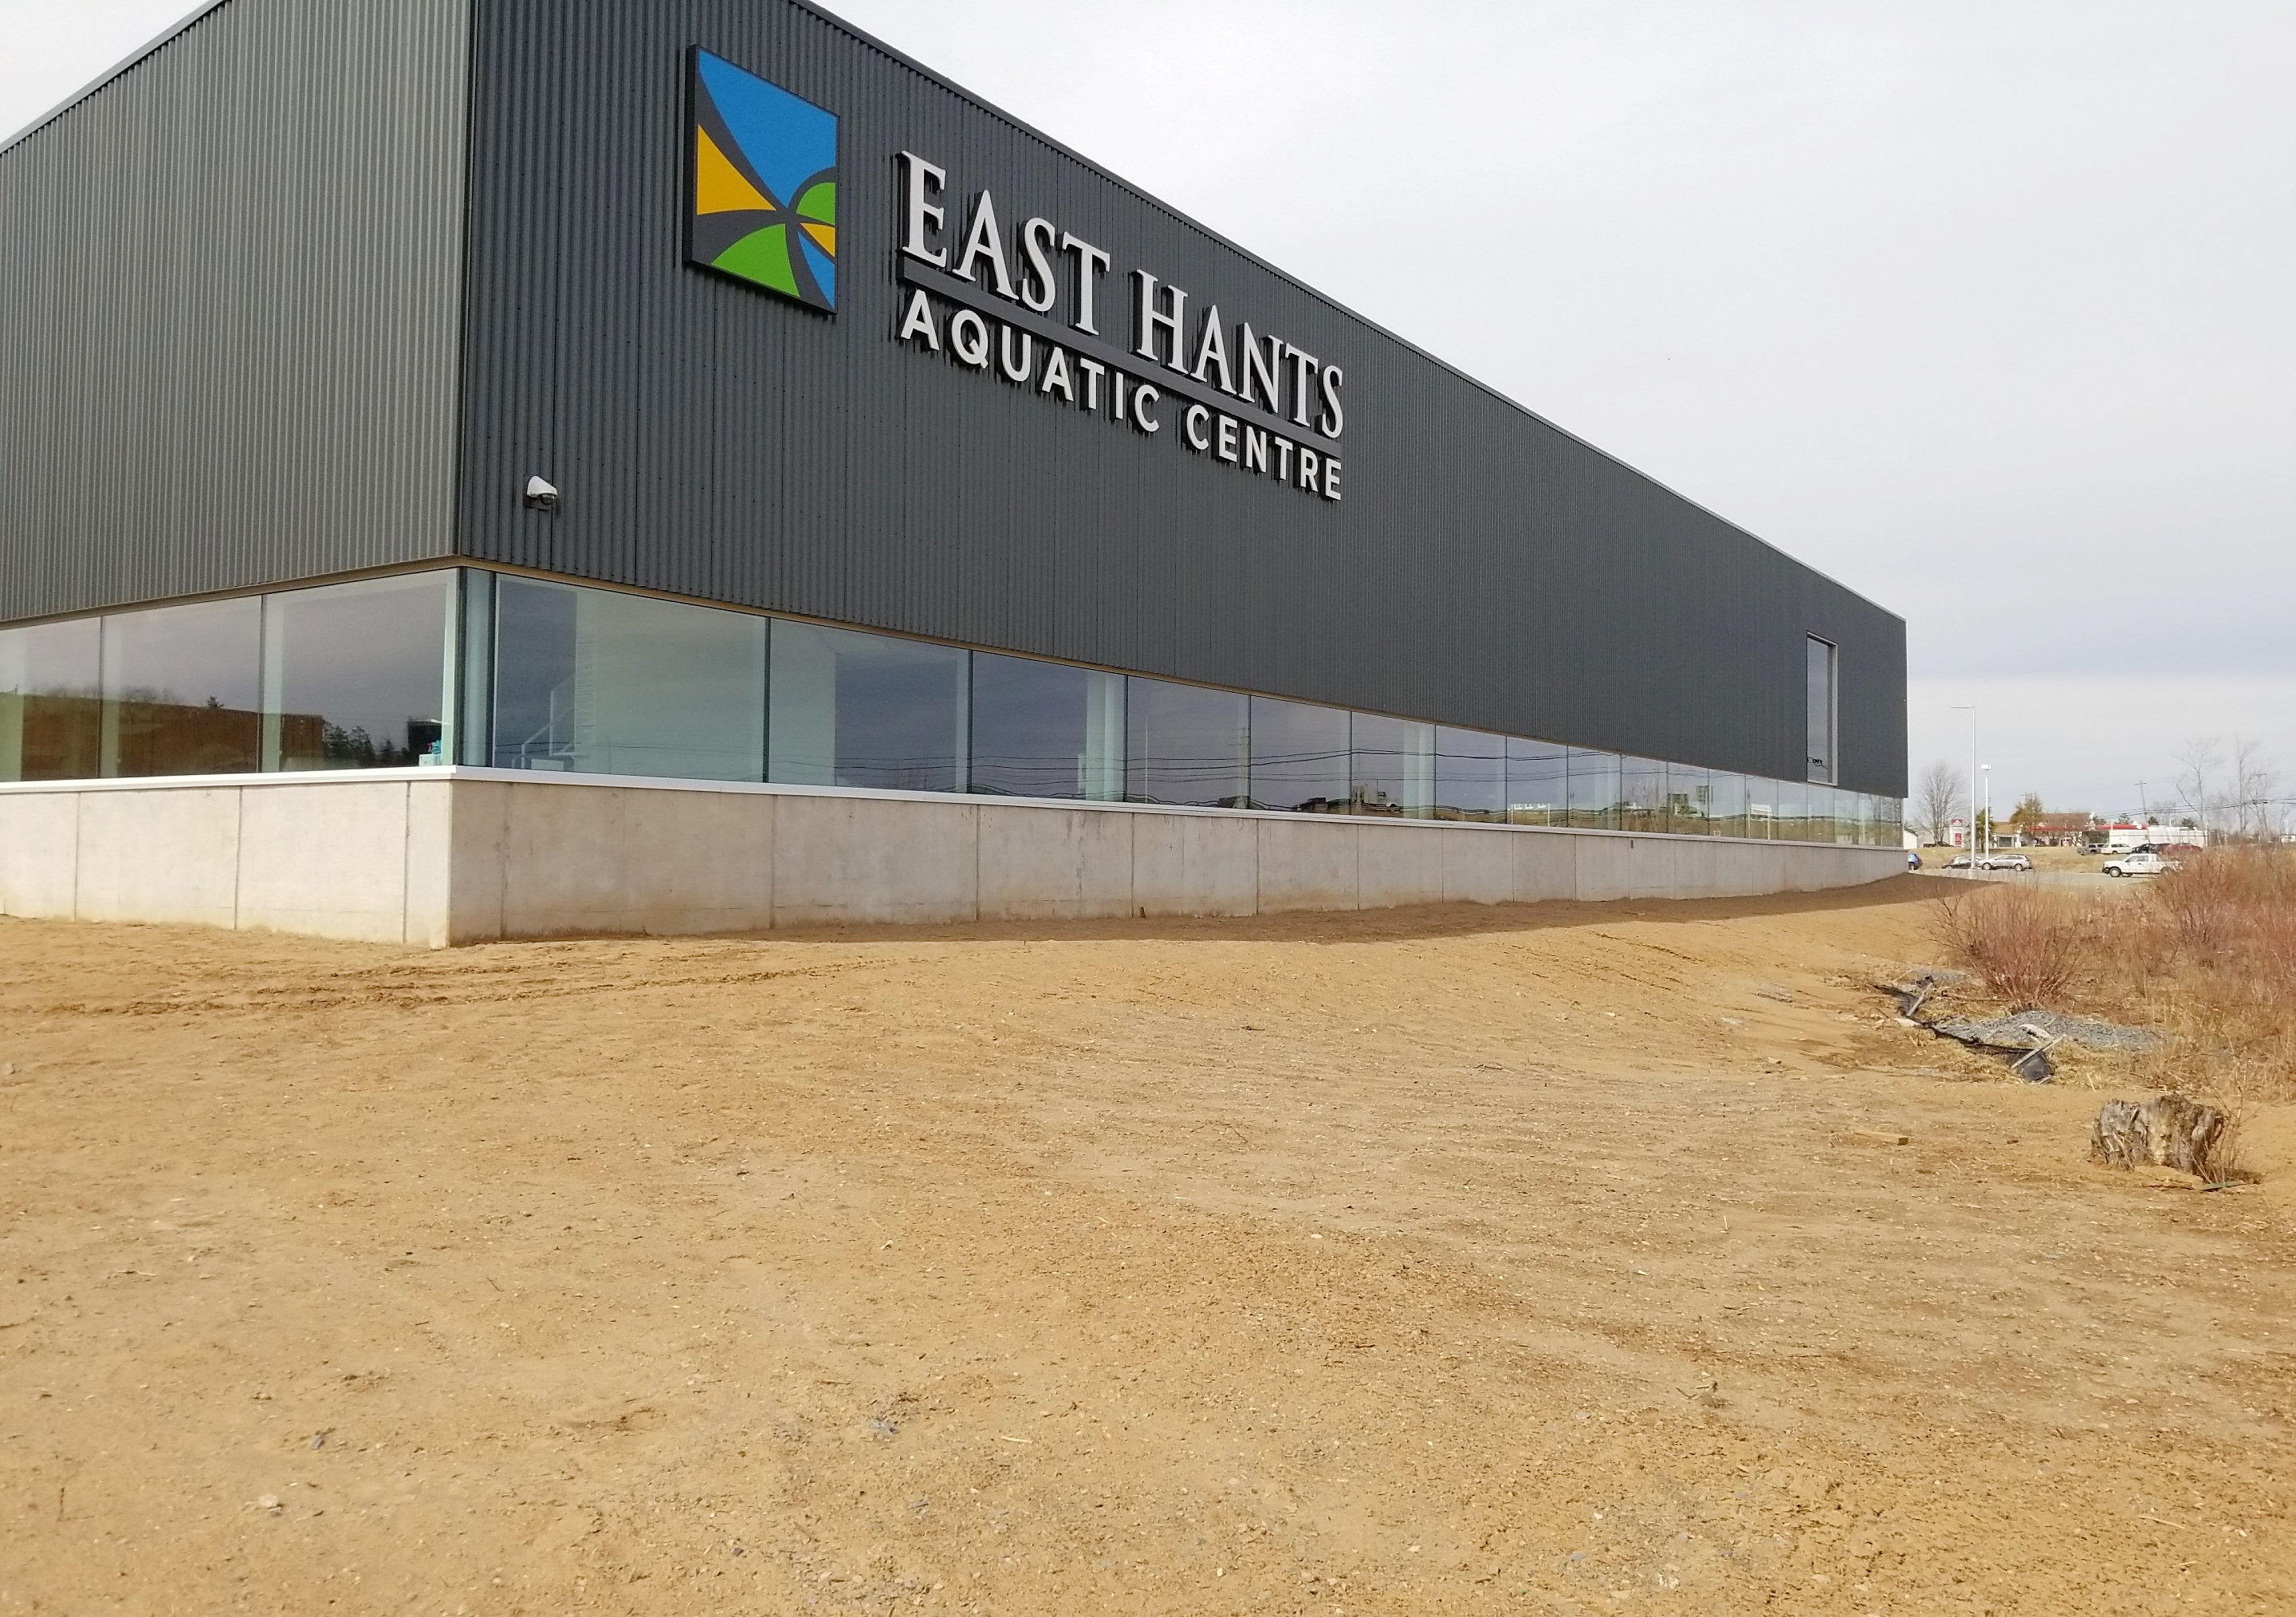 Exterior of East Hants Aquatic Centre showing signage on building